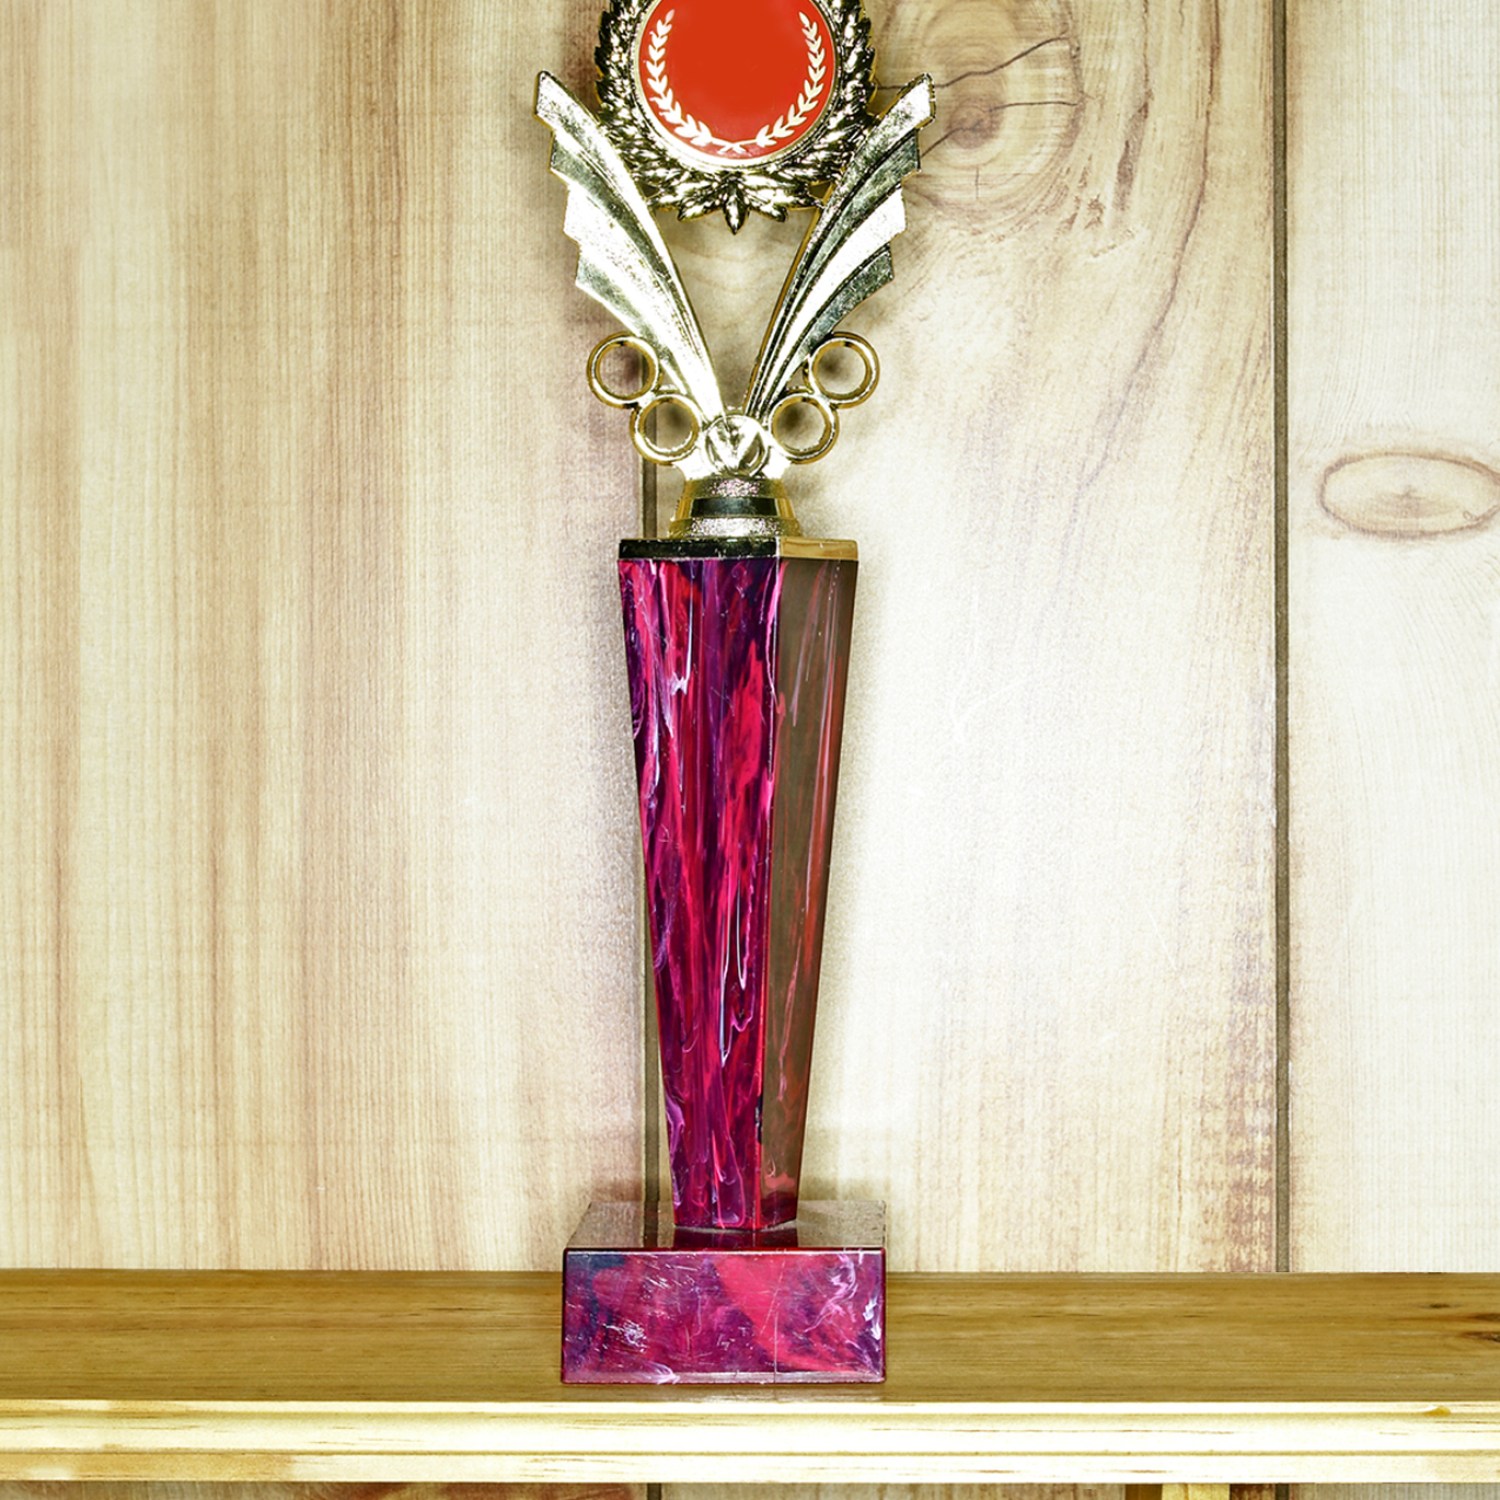 Red and gold trophy on shelf against wood-paneled wall